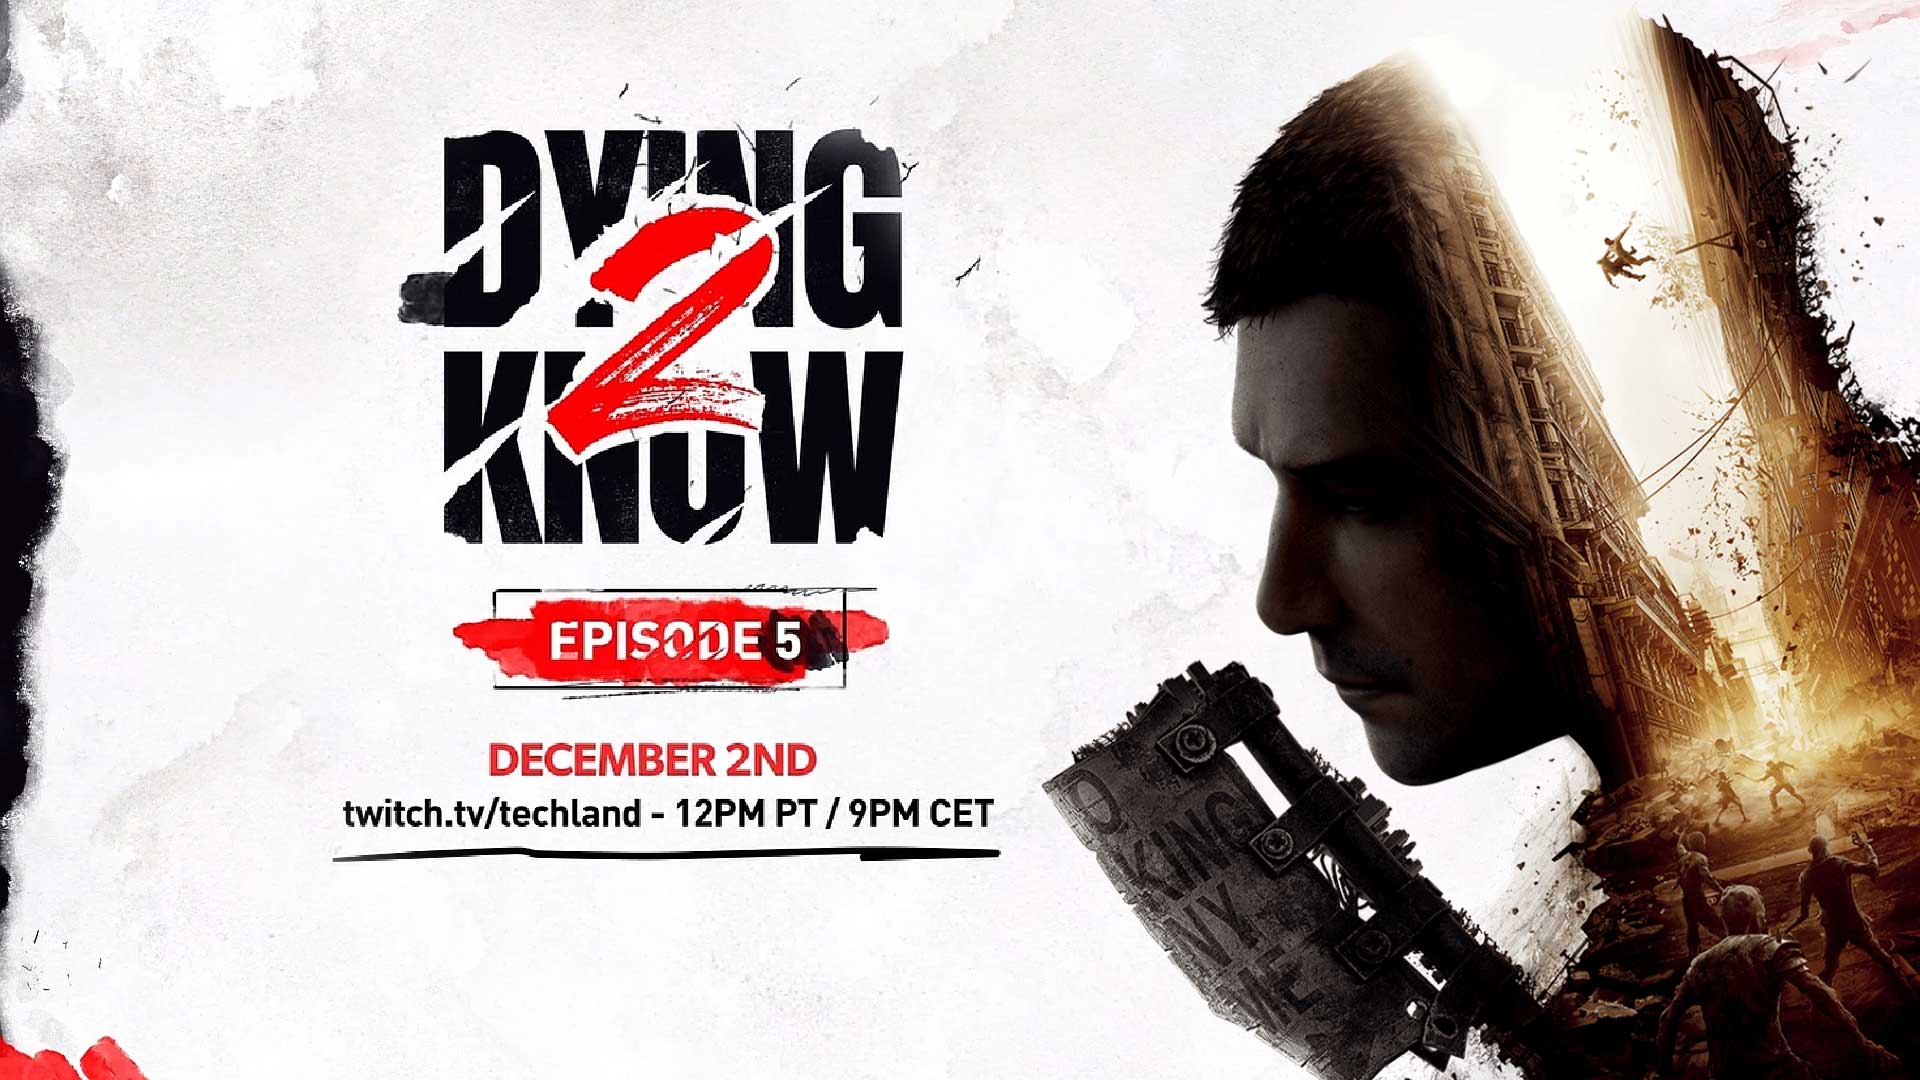 dying light 2 dying2know episode 5